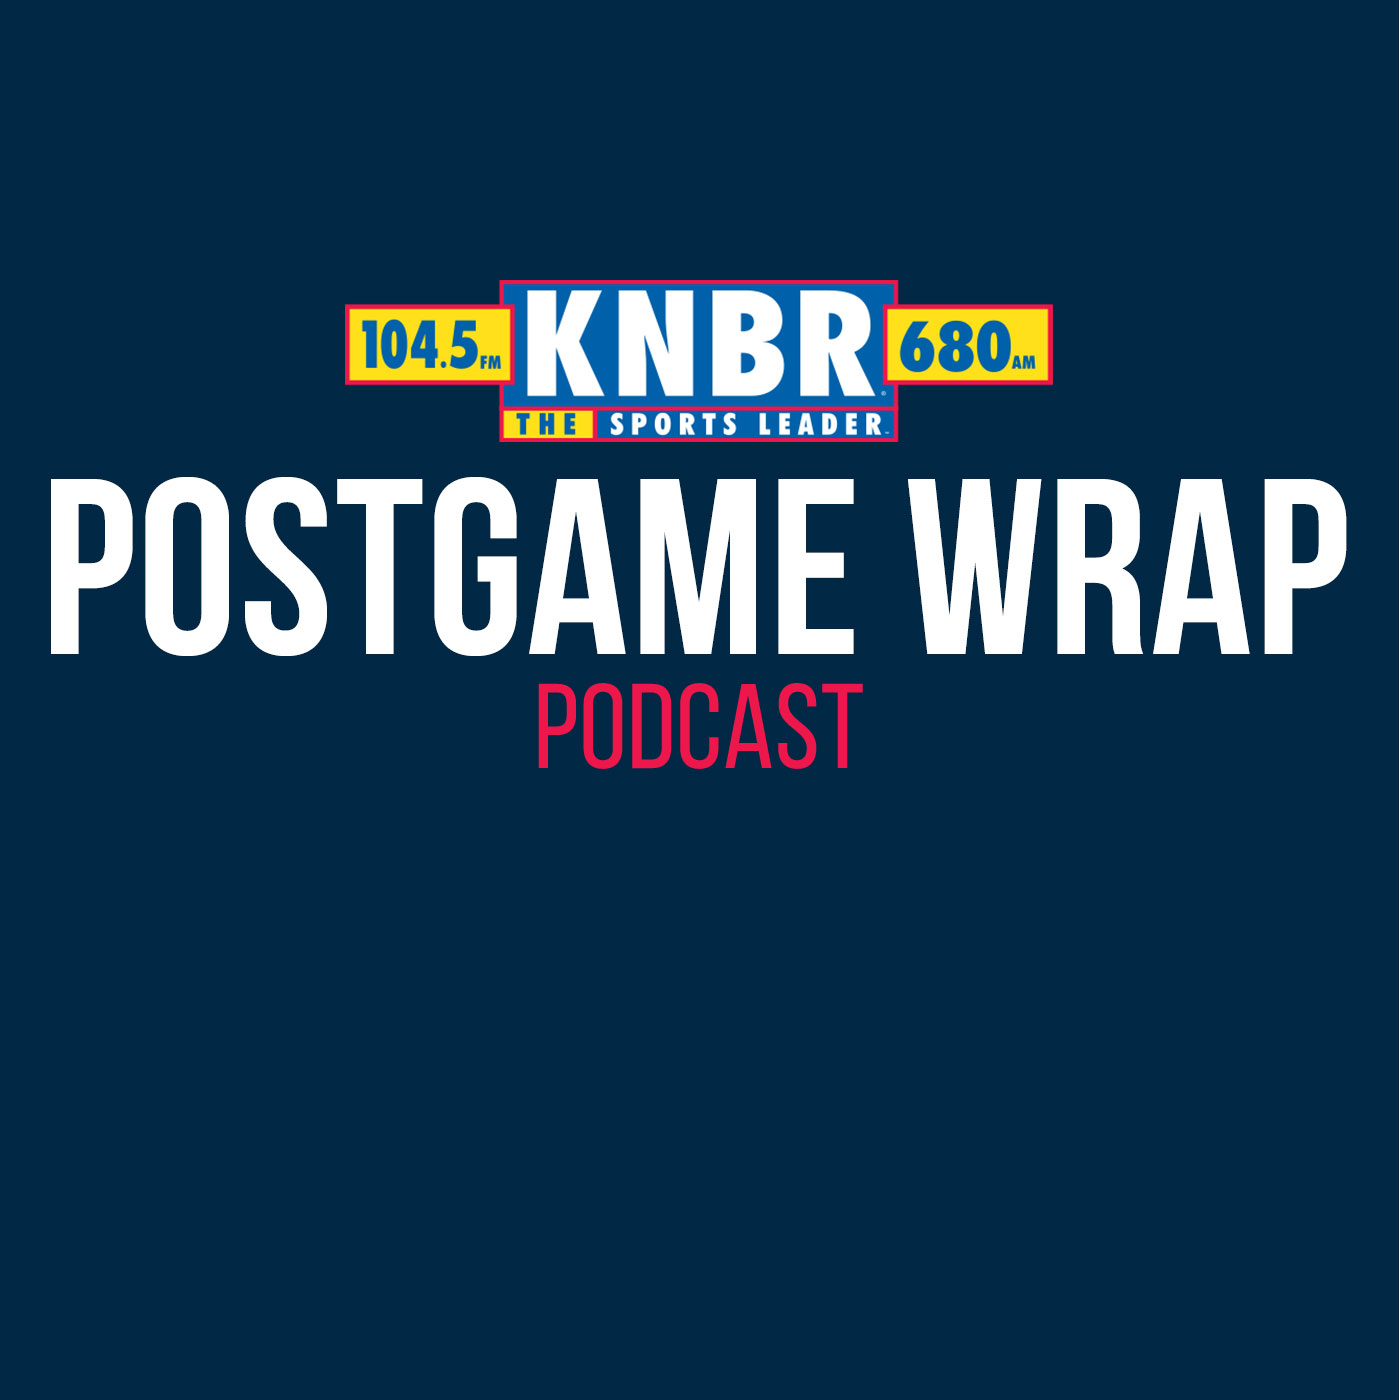 4-19 Game 2 Postgame Wrap: Mets 3, Giants 1